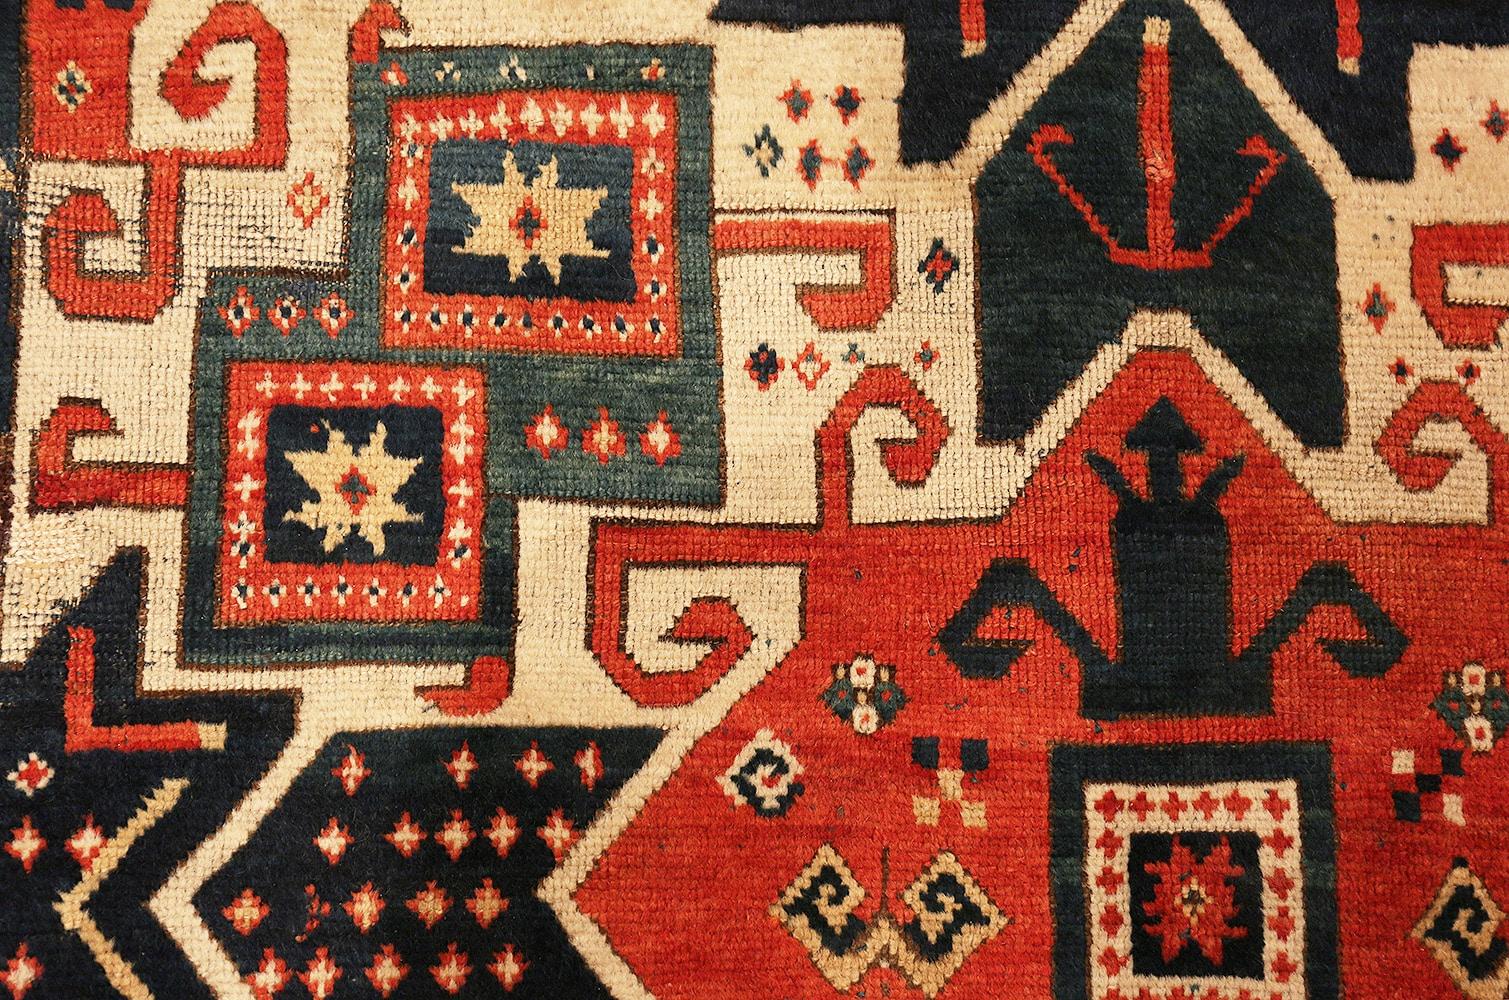 Hand-Knotted Rare Antique Caucasian Star Kazak Rug. Size: 4 ft 10 in x 7 ft (1.47 m x 2.13 m)